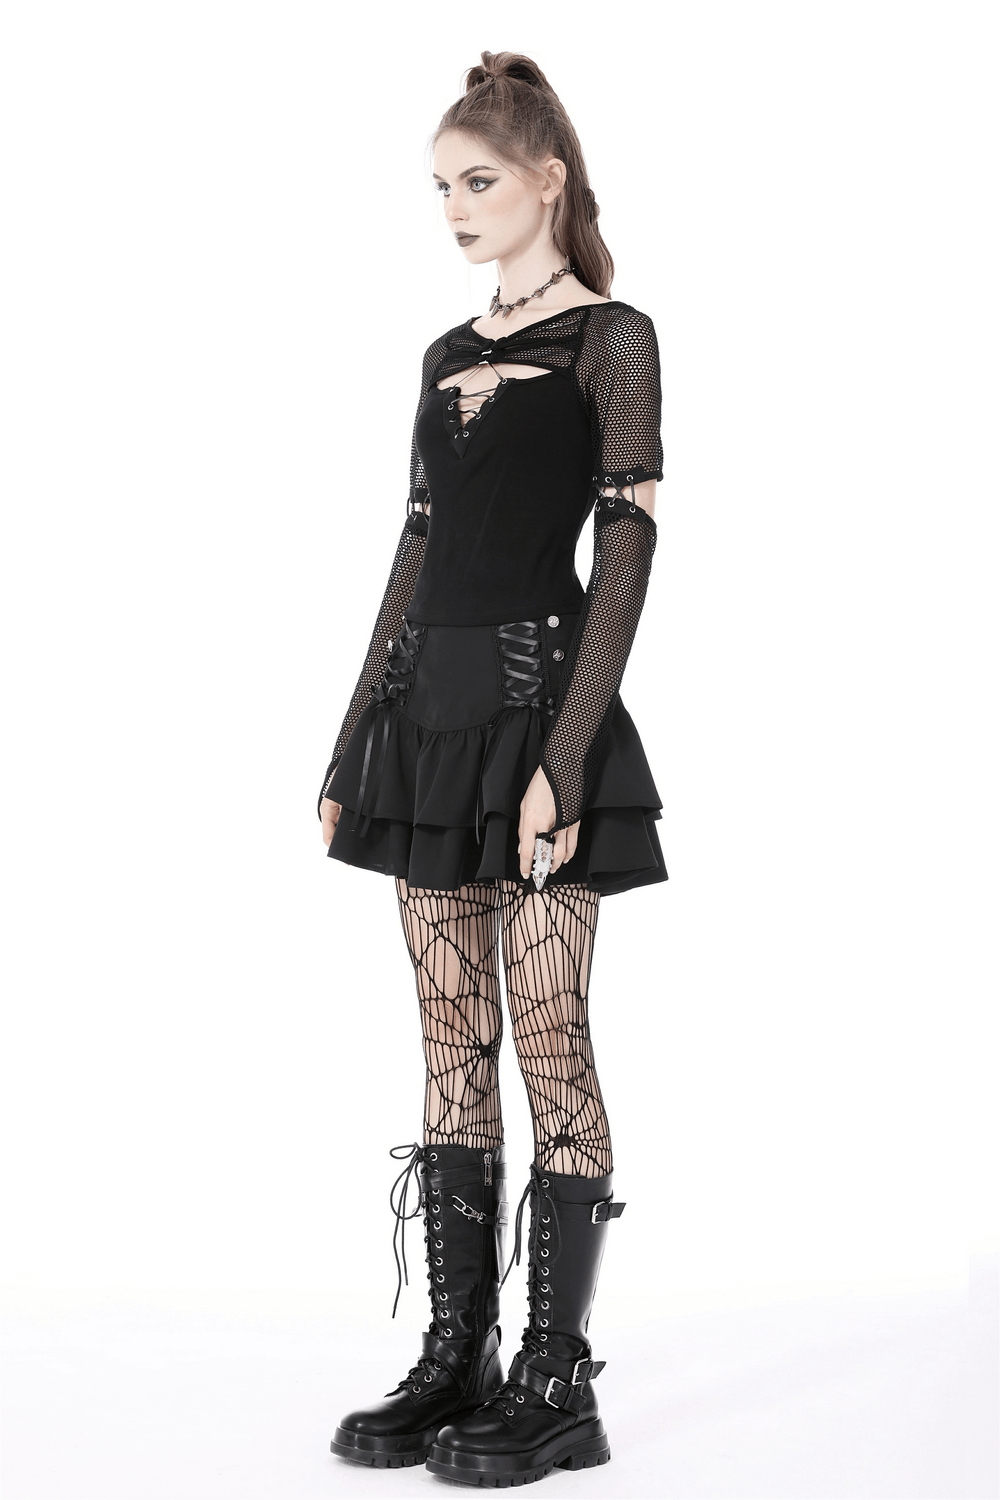 Stylish Female Mesh Goth Top with Lace-Up Sleeves